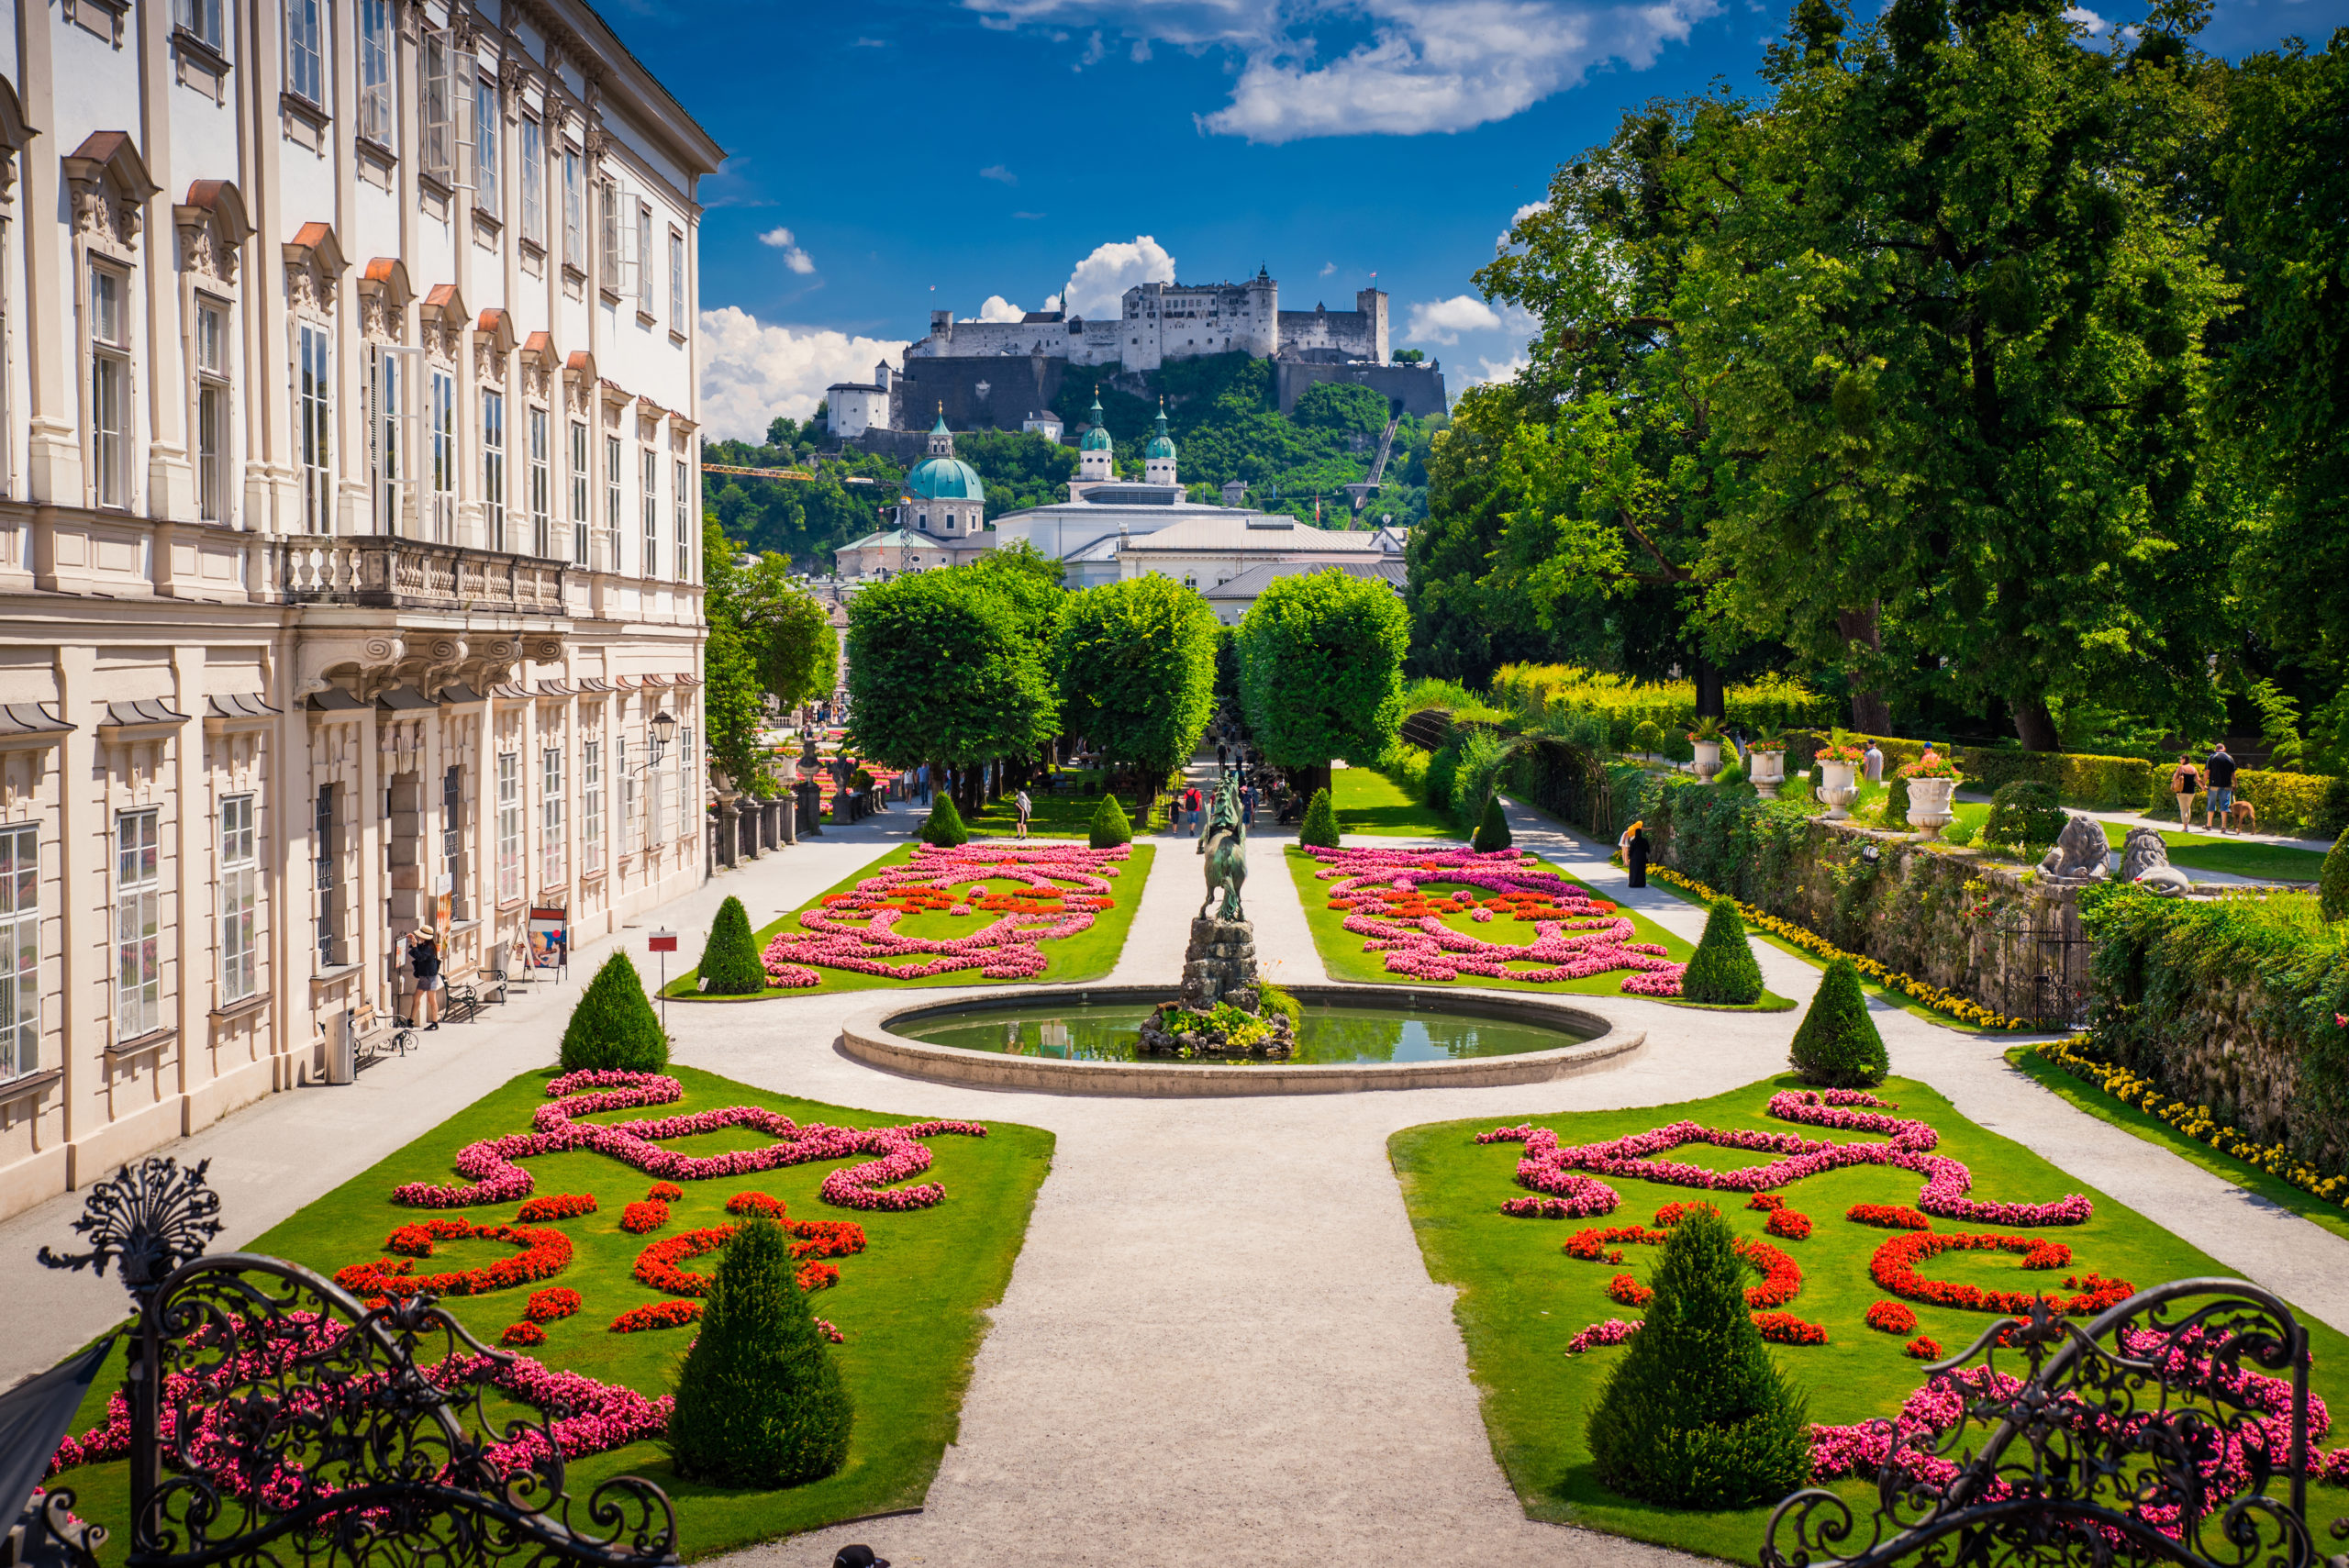 SALZBURG – Glory and magic of the Baroque